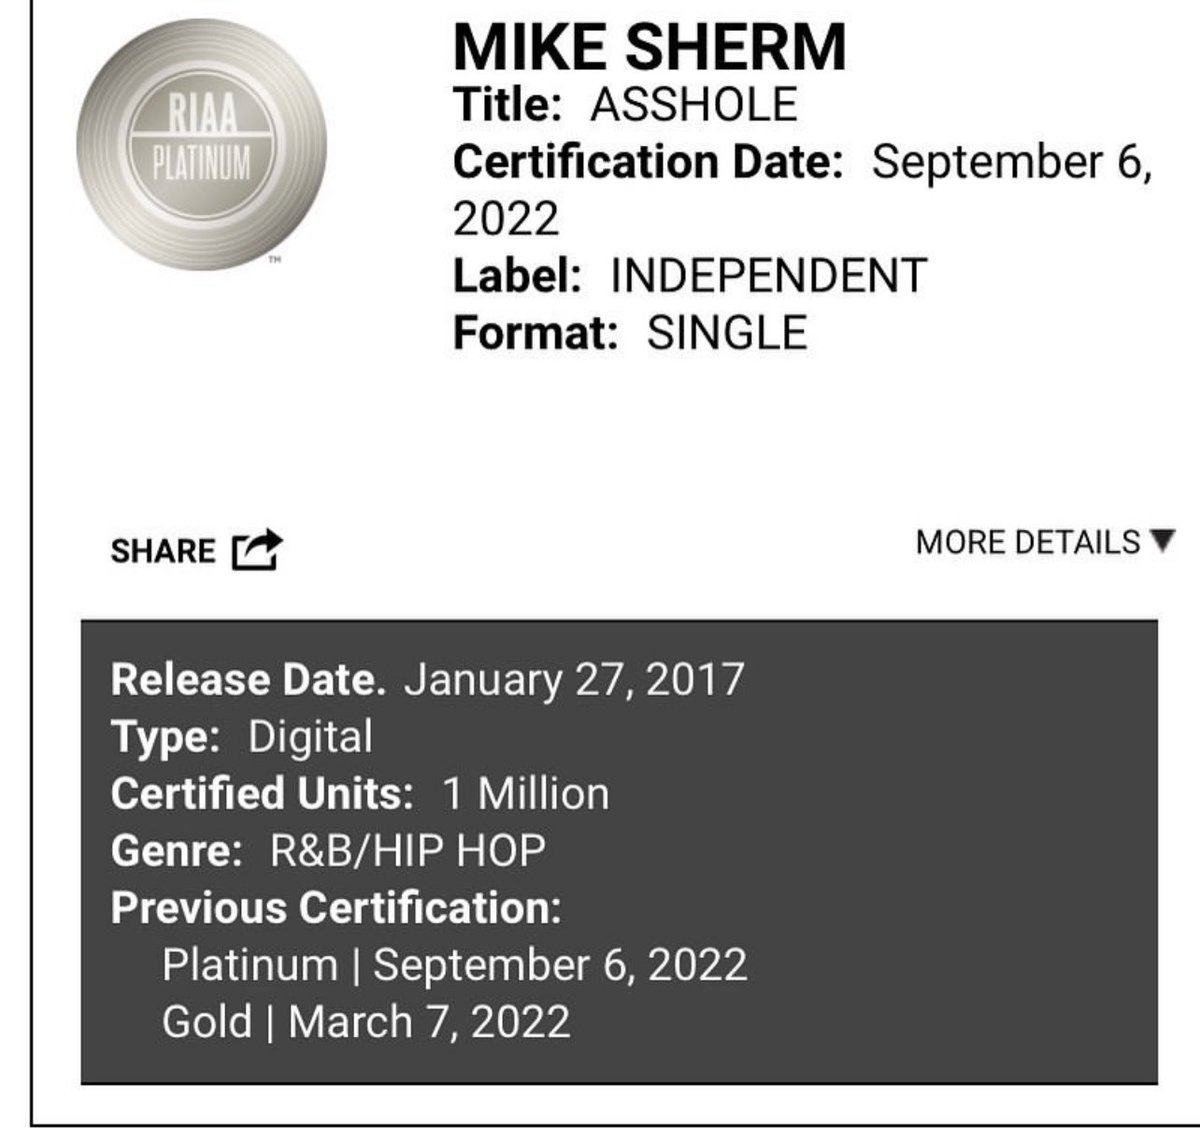 Mike Sherm “Asshole” is officially platinum